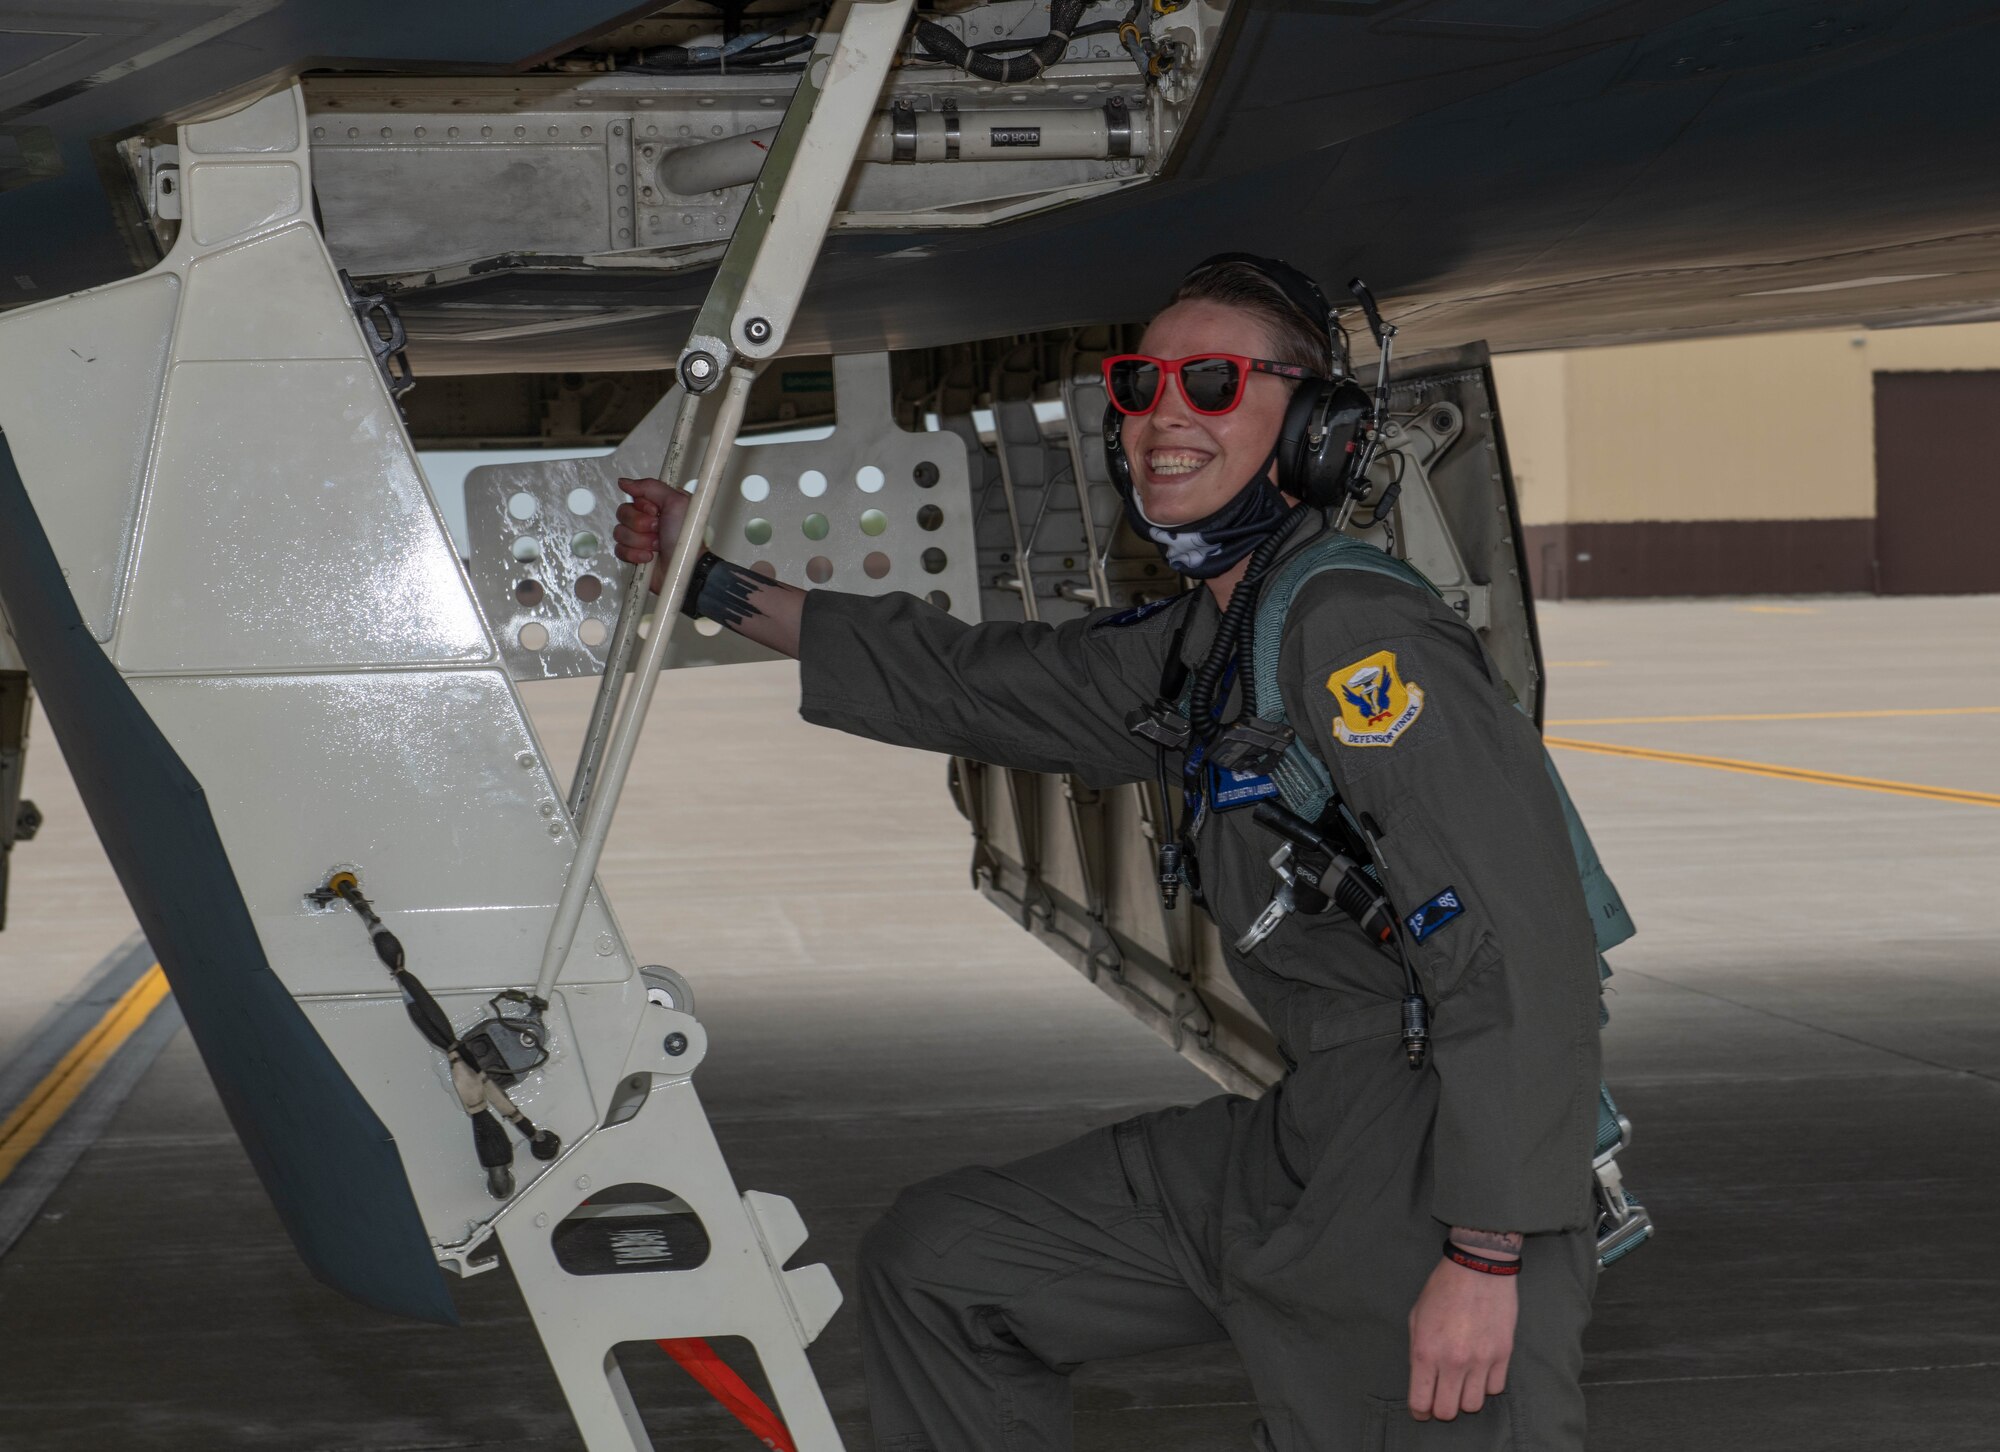 Lambert received the Thomas N. Barnes Crew Chief of the Year Award for her work as the dedicated crew chief of the Spirit of New York, to reward her achievements she earned the opportunity to fly in the stealth bomber.